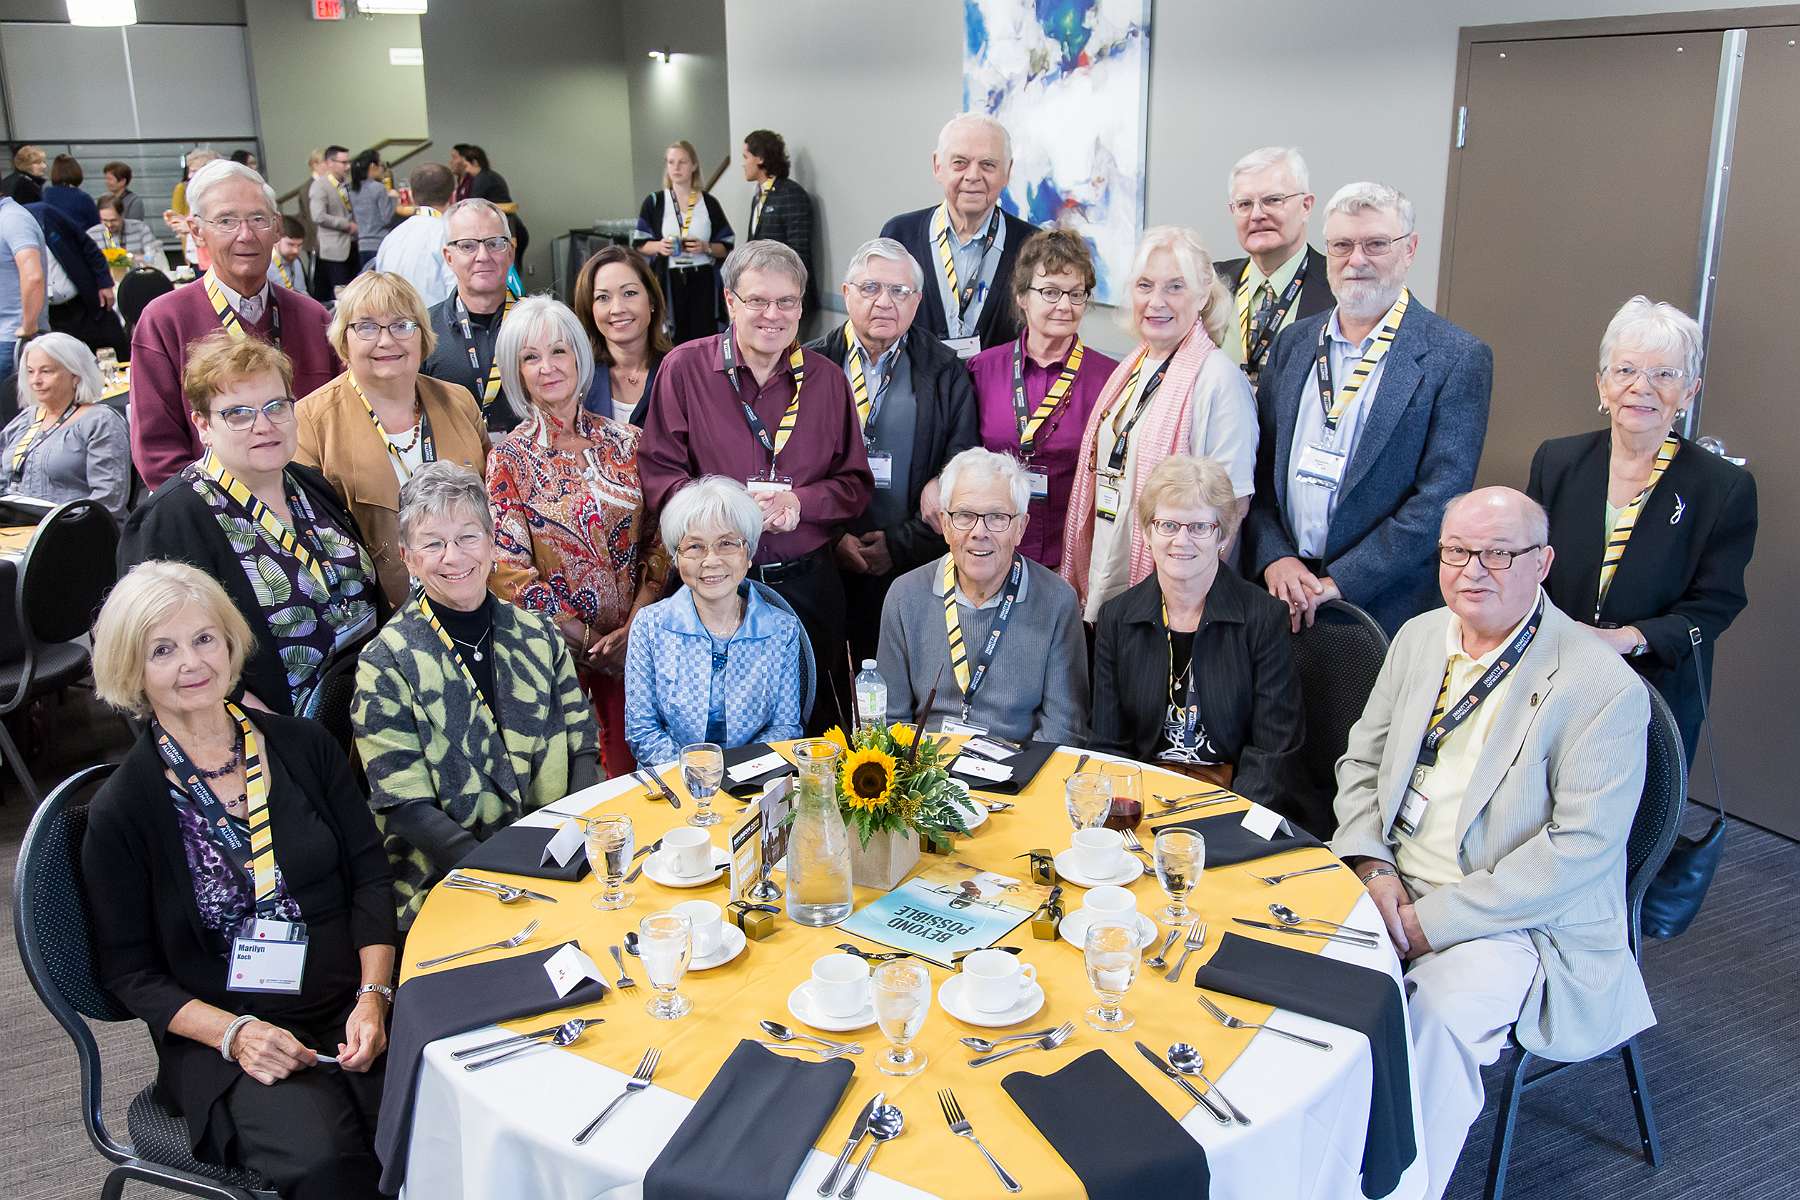 Waterloo alumni and friends attend the President's Milestone Luncheon in 2018.